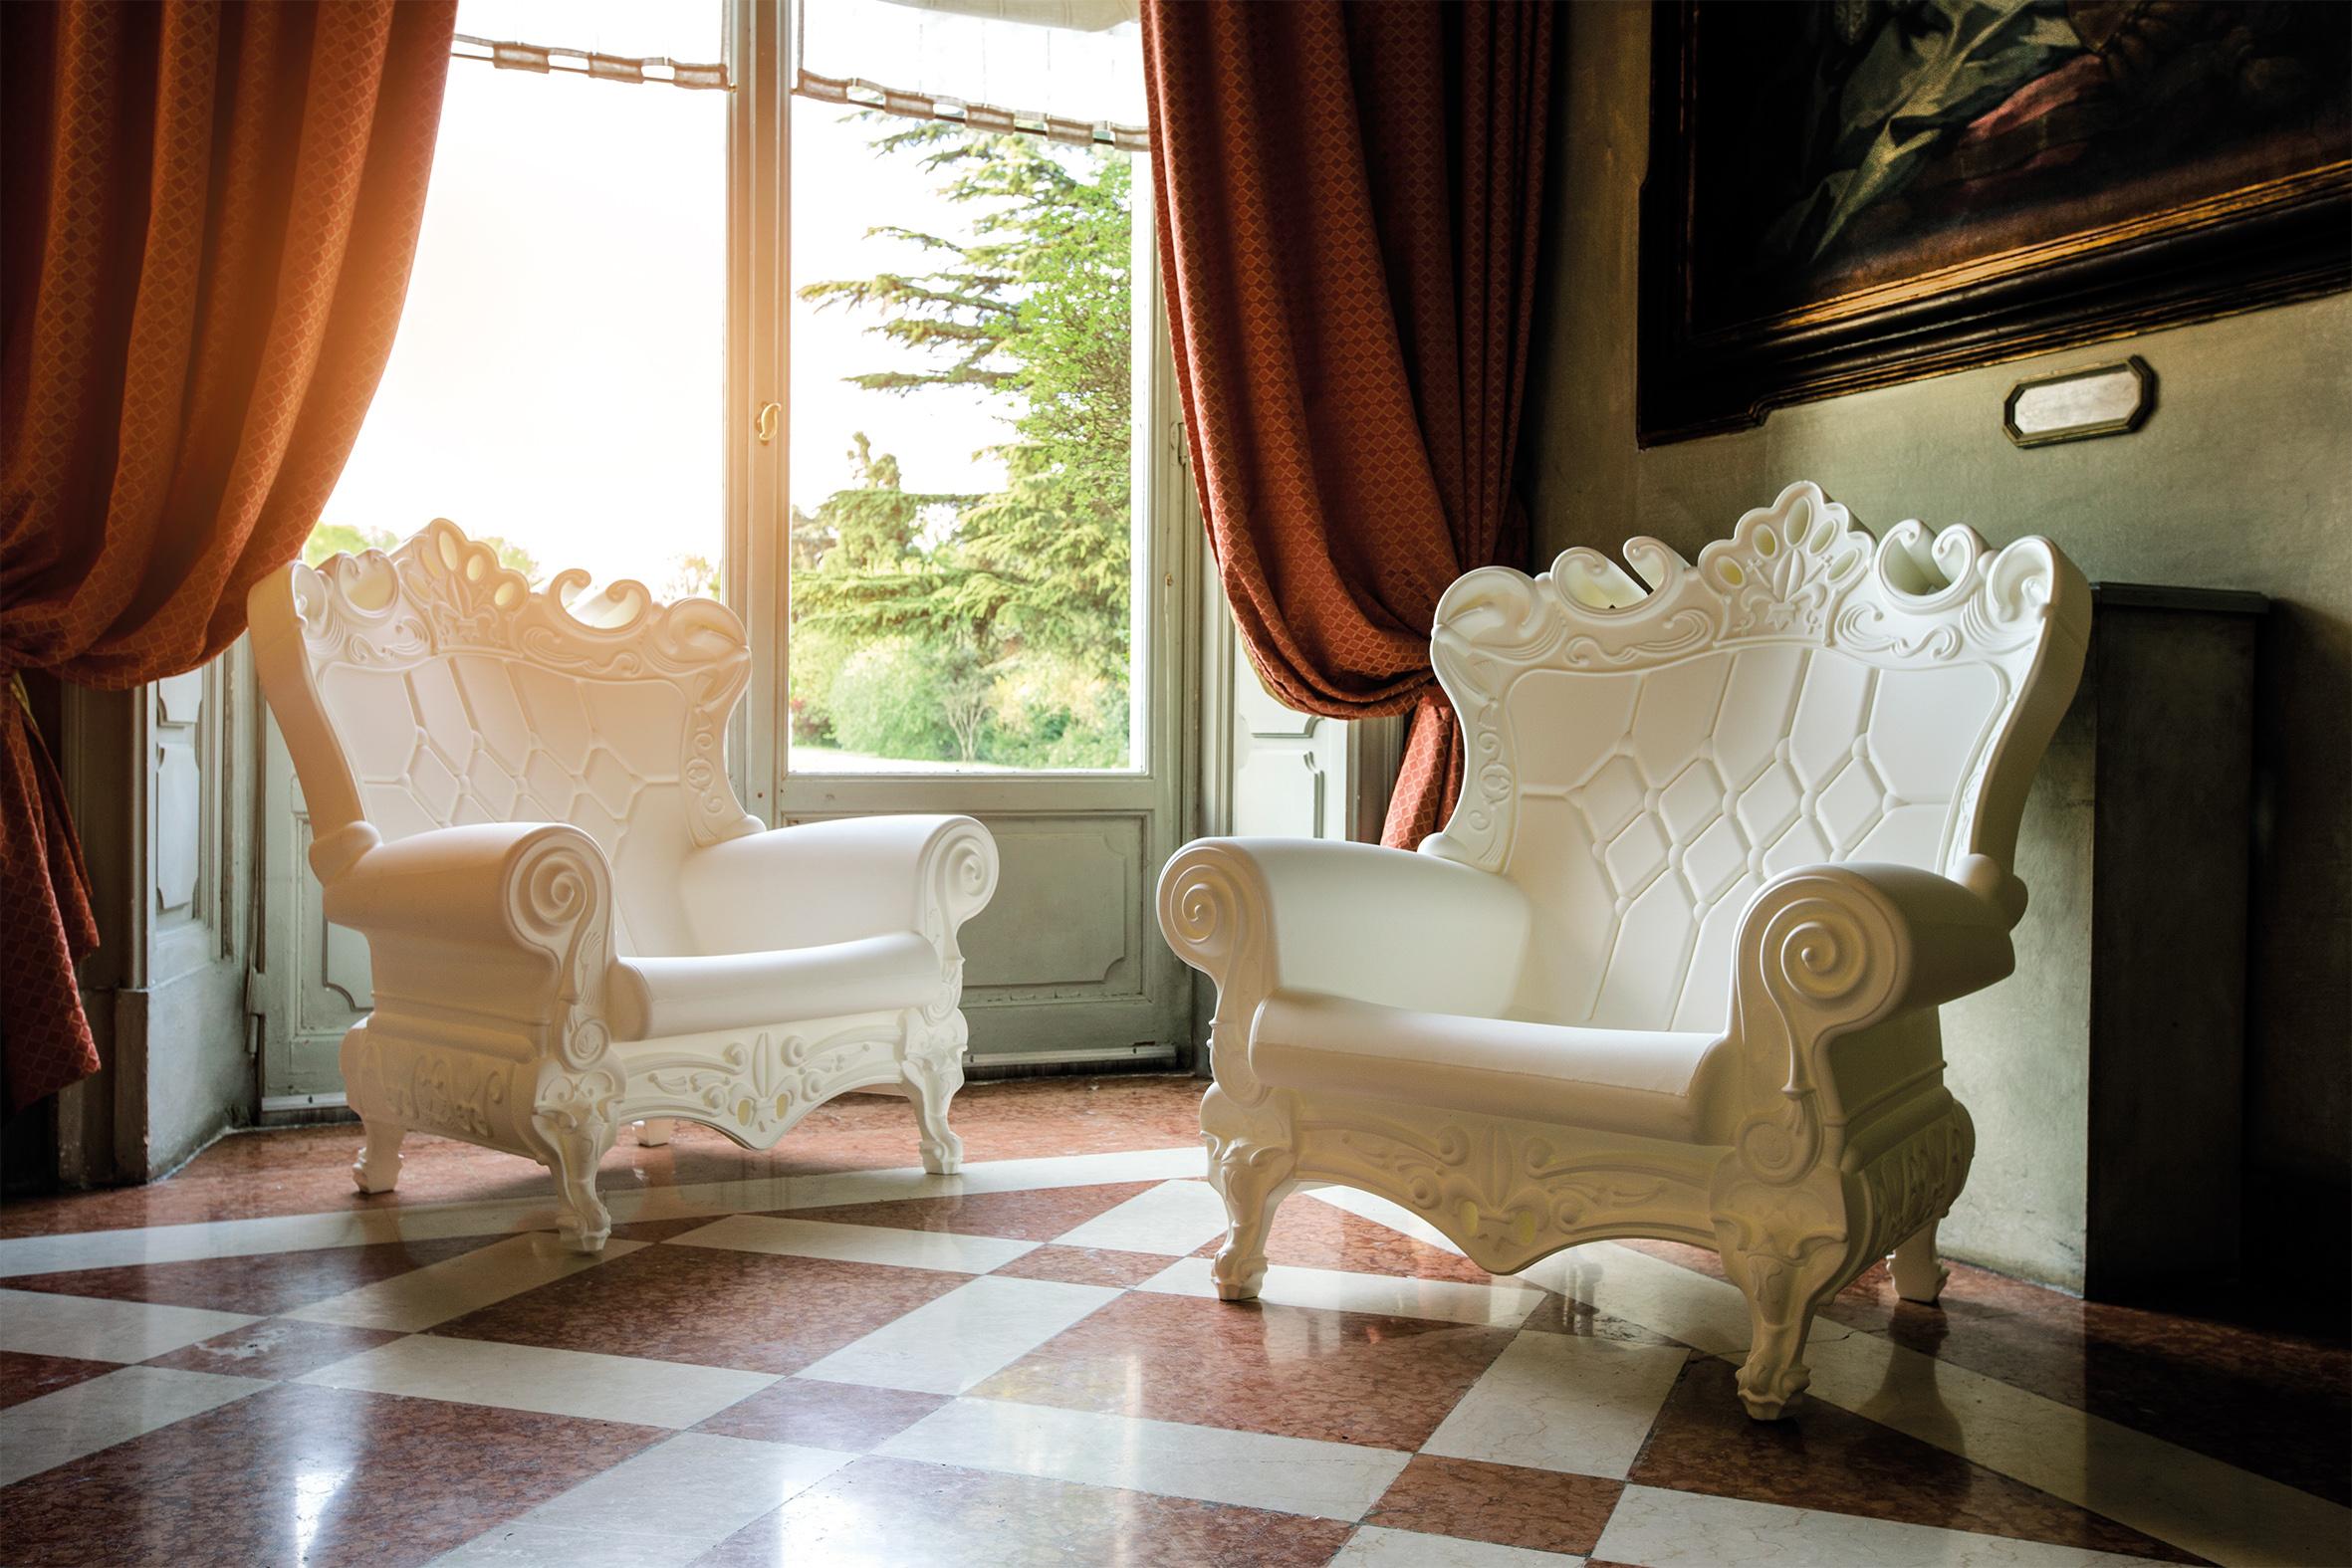 Queen of Love is the unique armchair created by the designer Graziano Moro and Renato Pigatti. The iconic Queen of Love armchair is the first and the most loved product of the whole Design of Love collection: as a throne, Queen of Love crowns